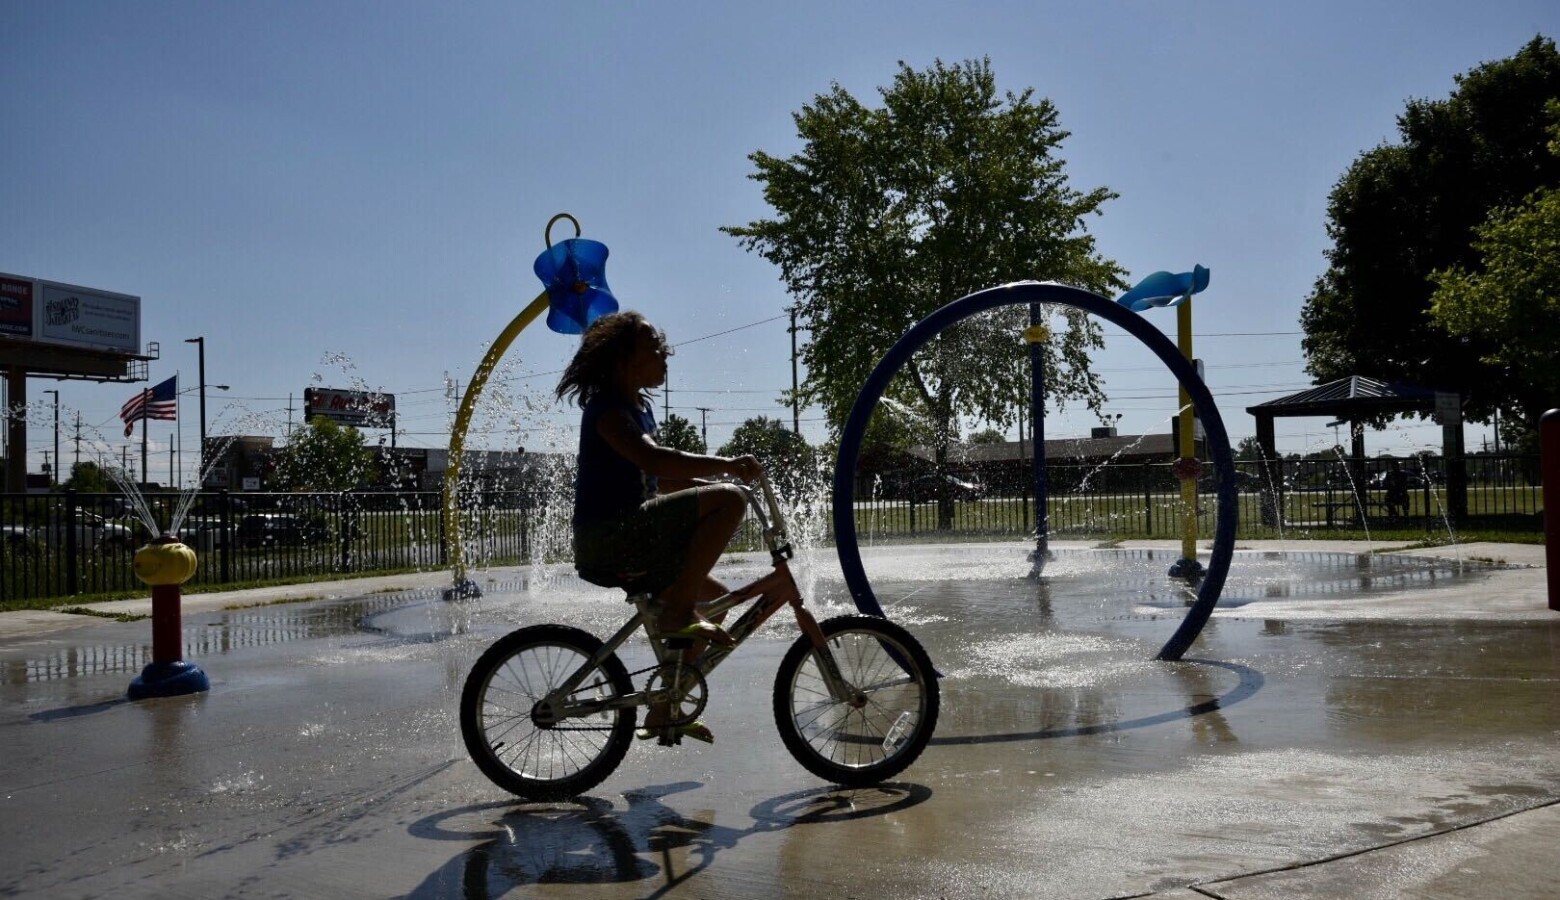 A young child rides a bike at a splash pad in South Bend. (Justin Hicks/IPB News)